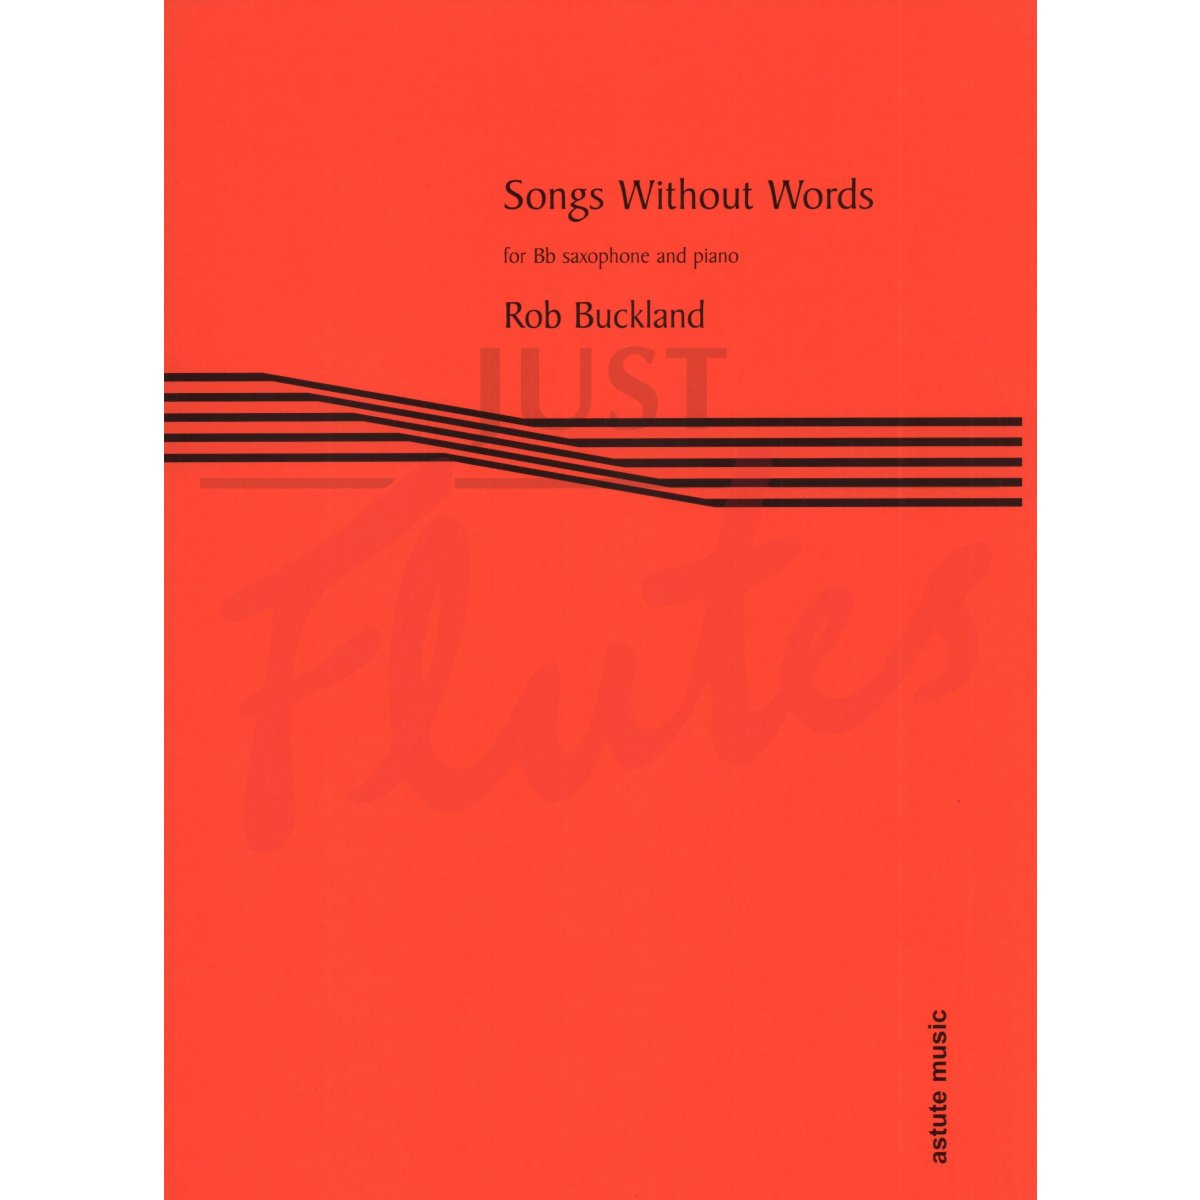 Songs Without Words for Tenor or Soprano Saxophone and Piano